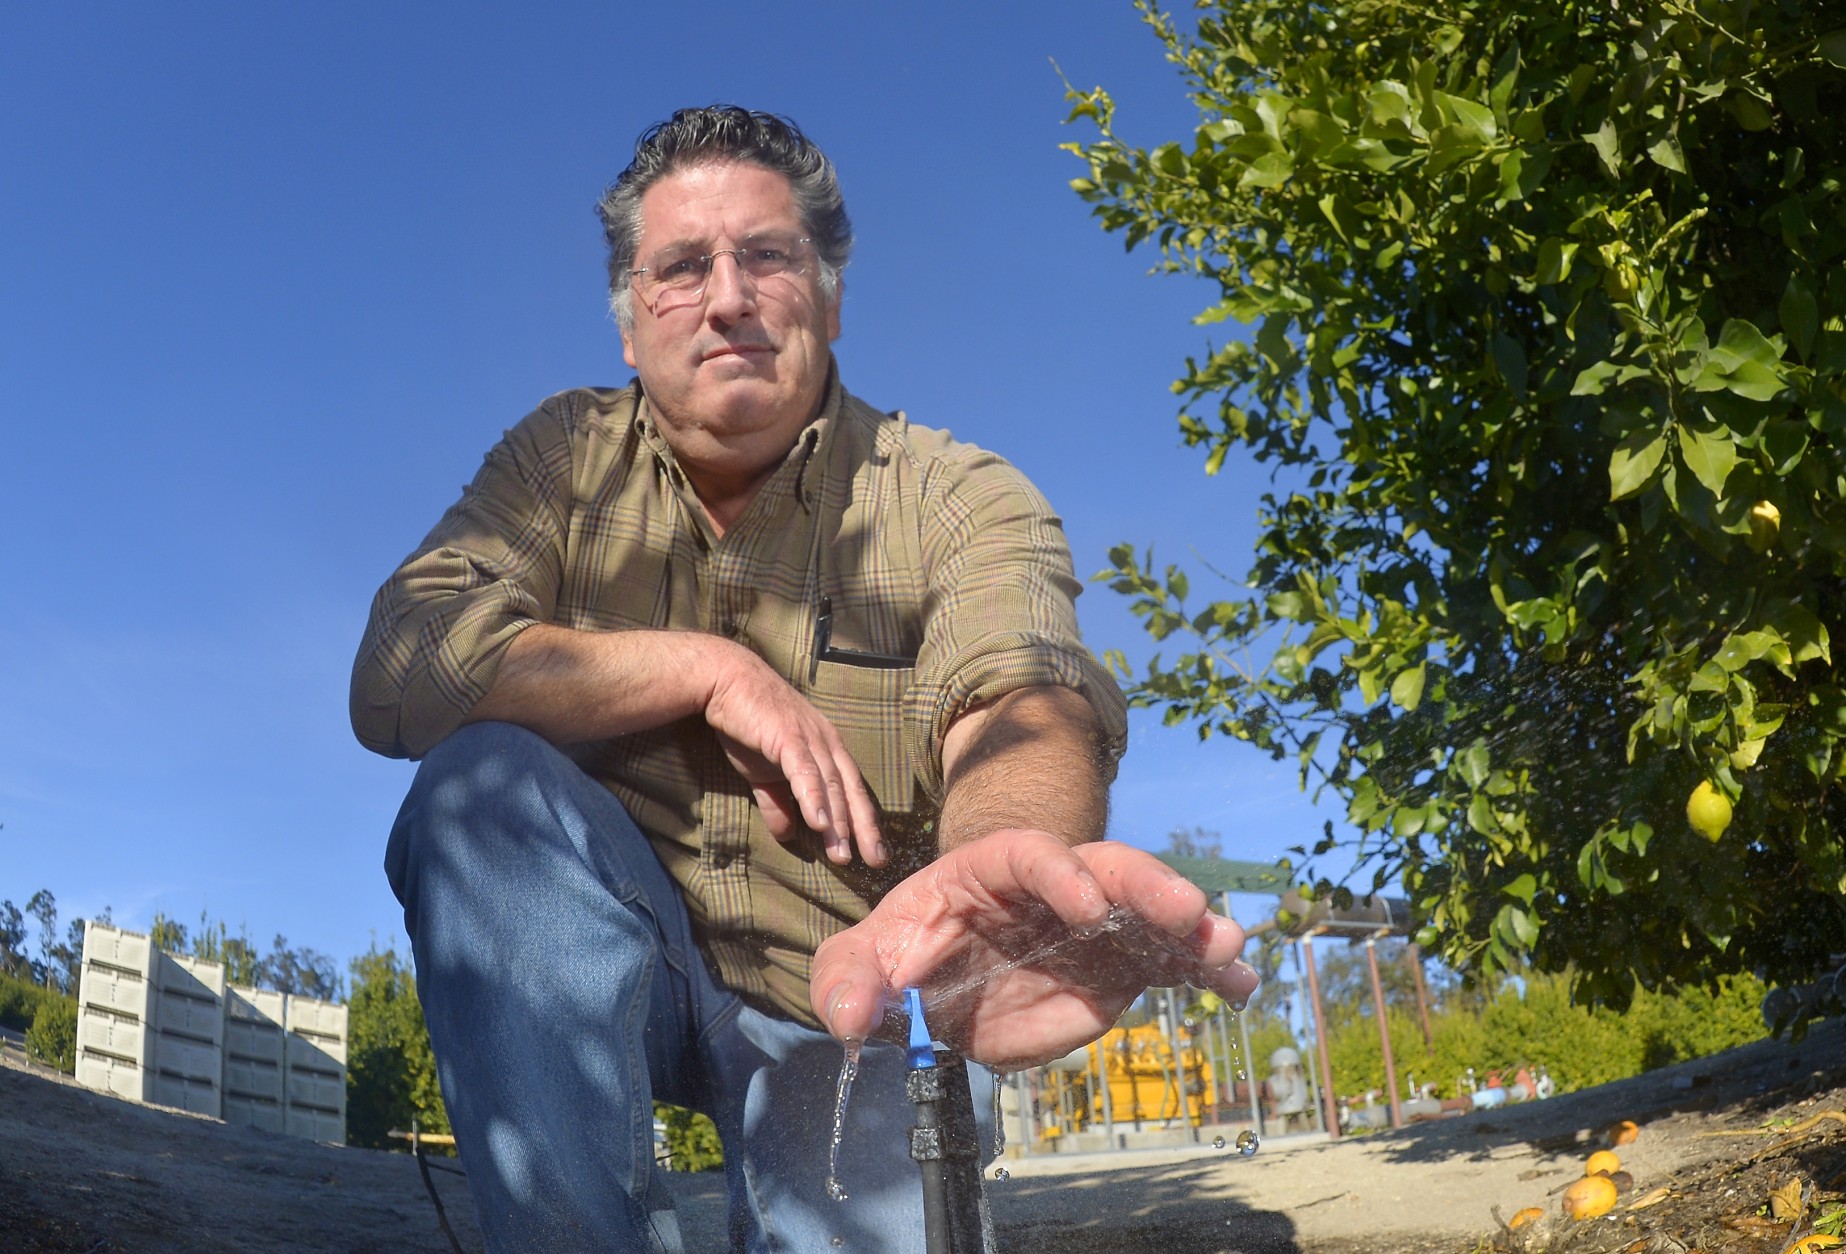 In this Jan. 18, 2013 photo, David Schwabauer, managing partner of Leavens Ranches, holds his hand over an irrigation sprinkler, next to one of his lemon and avocado trees in Moorpark, Calif. In the background is one of his pumps that is pulling water from an underground well. For years Schwabauer has watched groundwater levels retreat with higher demand from encroaching development, forcing ranchers and farmers to sink piping deeper into the earth or drill expensive, new wells for irrigation. In the heat of summer, he pumps 3,000 gallons a minute for his thirsty trees. (AP Photo/Mark J. Terrill)